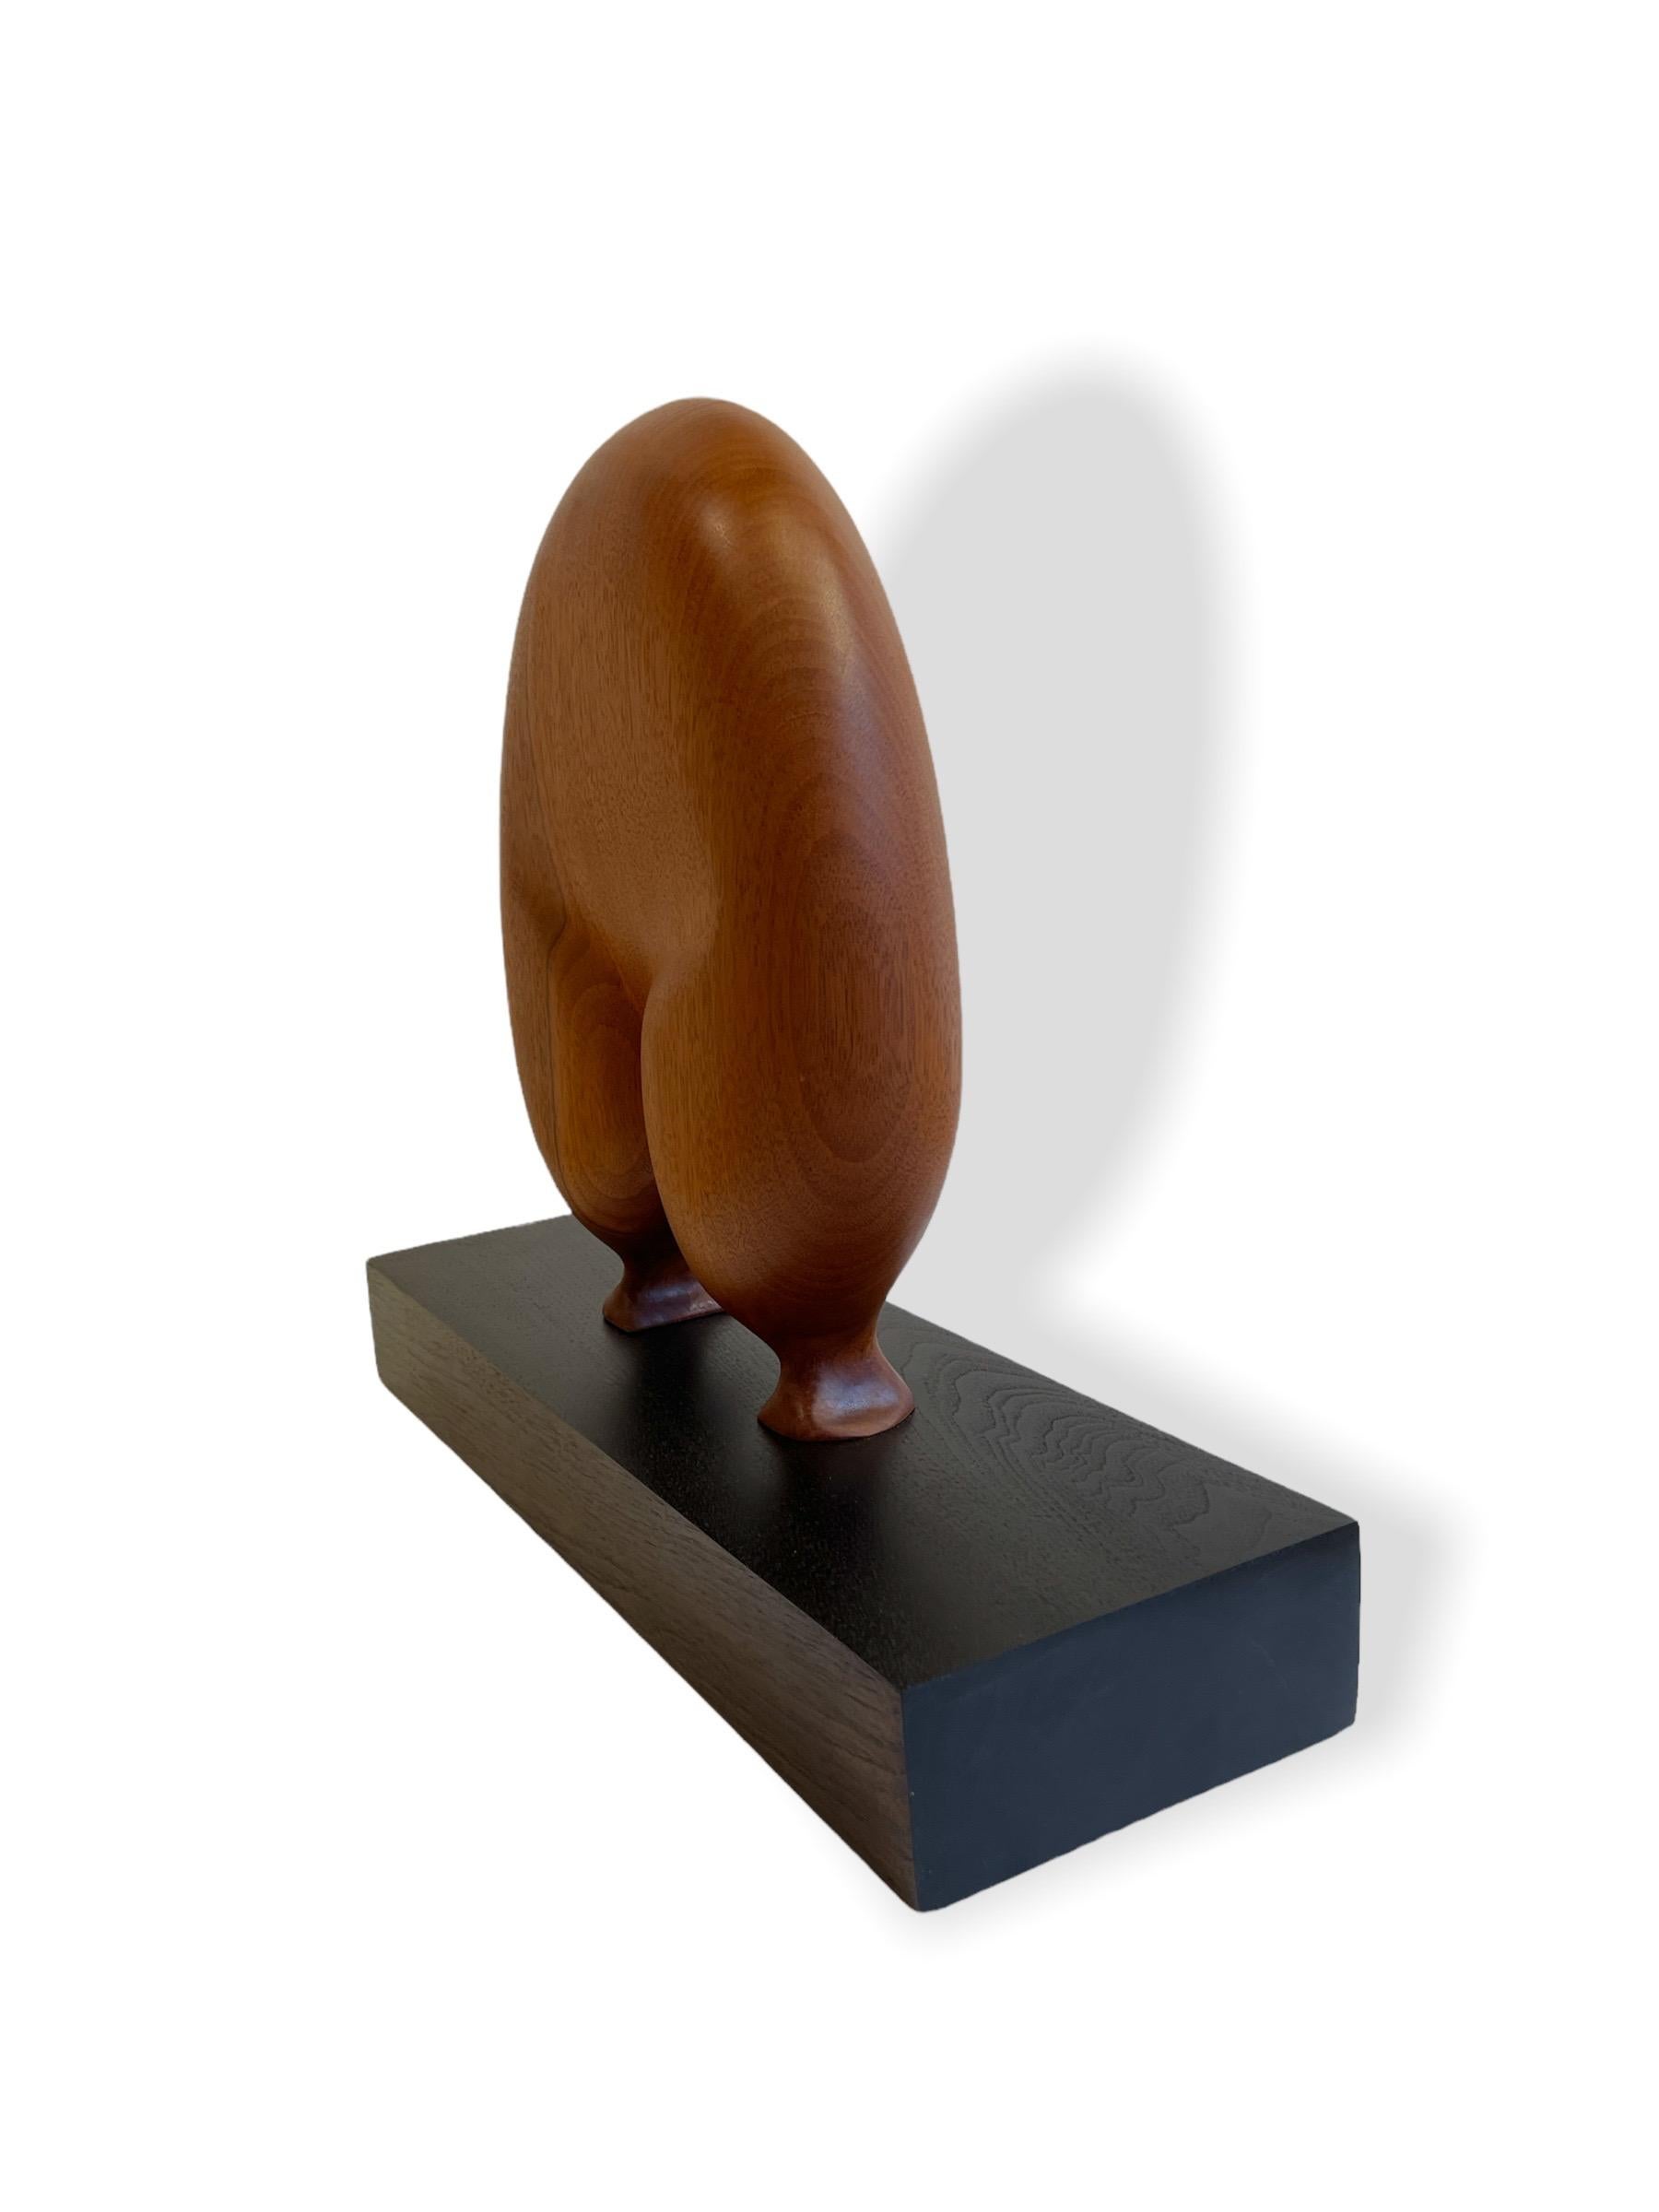 American Submission, Mahogany, Hand Carved Wooden Sculpture on Dark Base